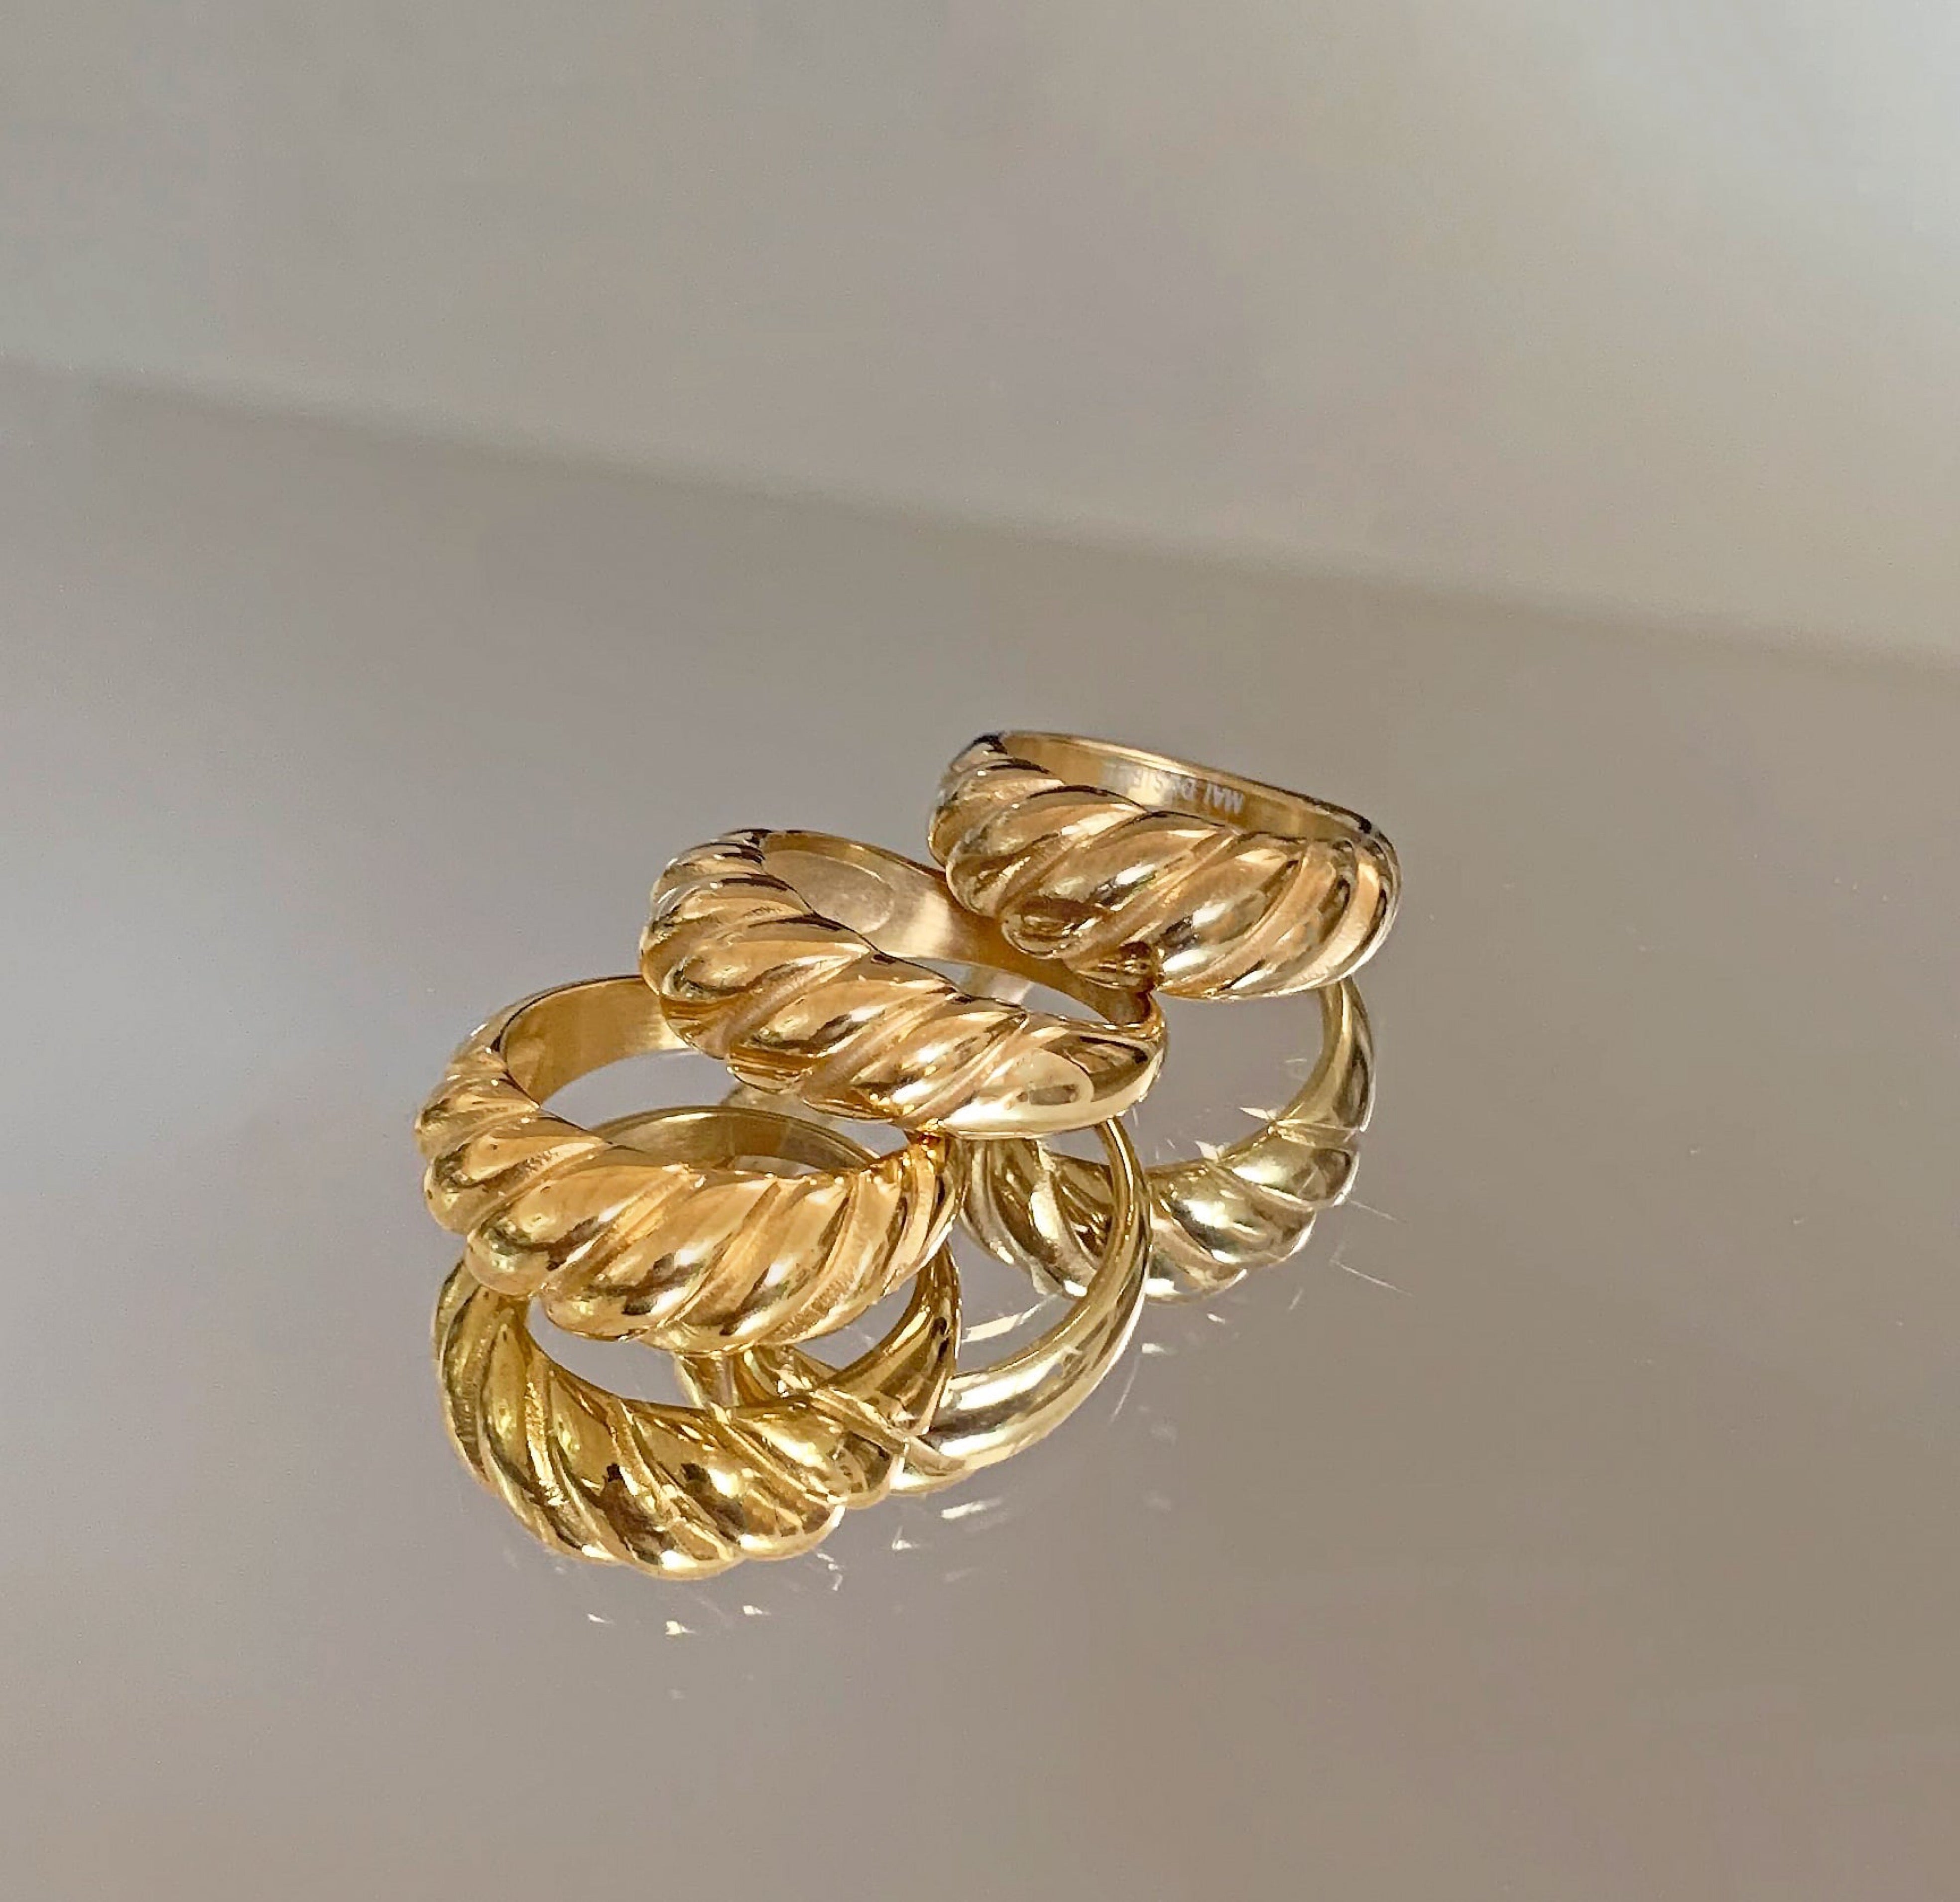 Gold classic croissant ring. Waterproof rings